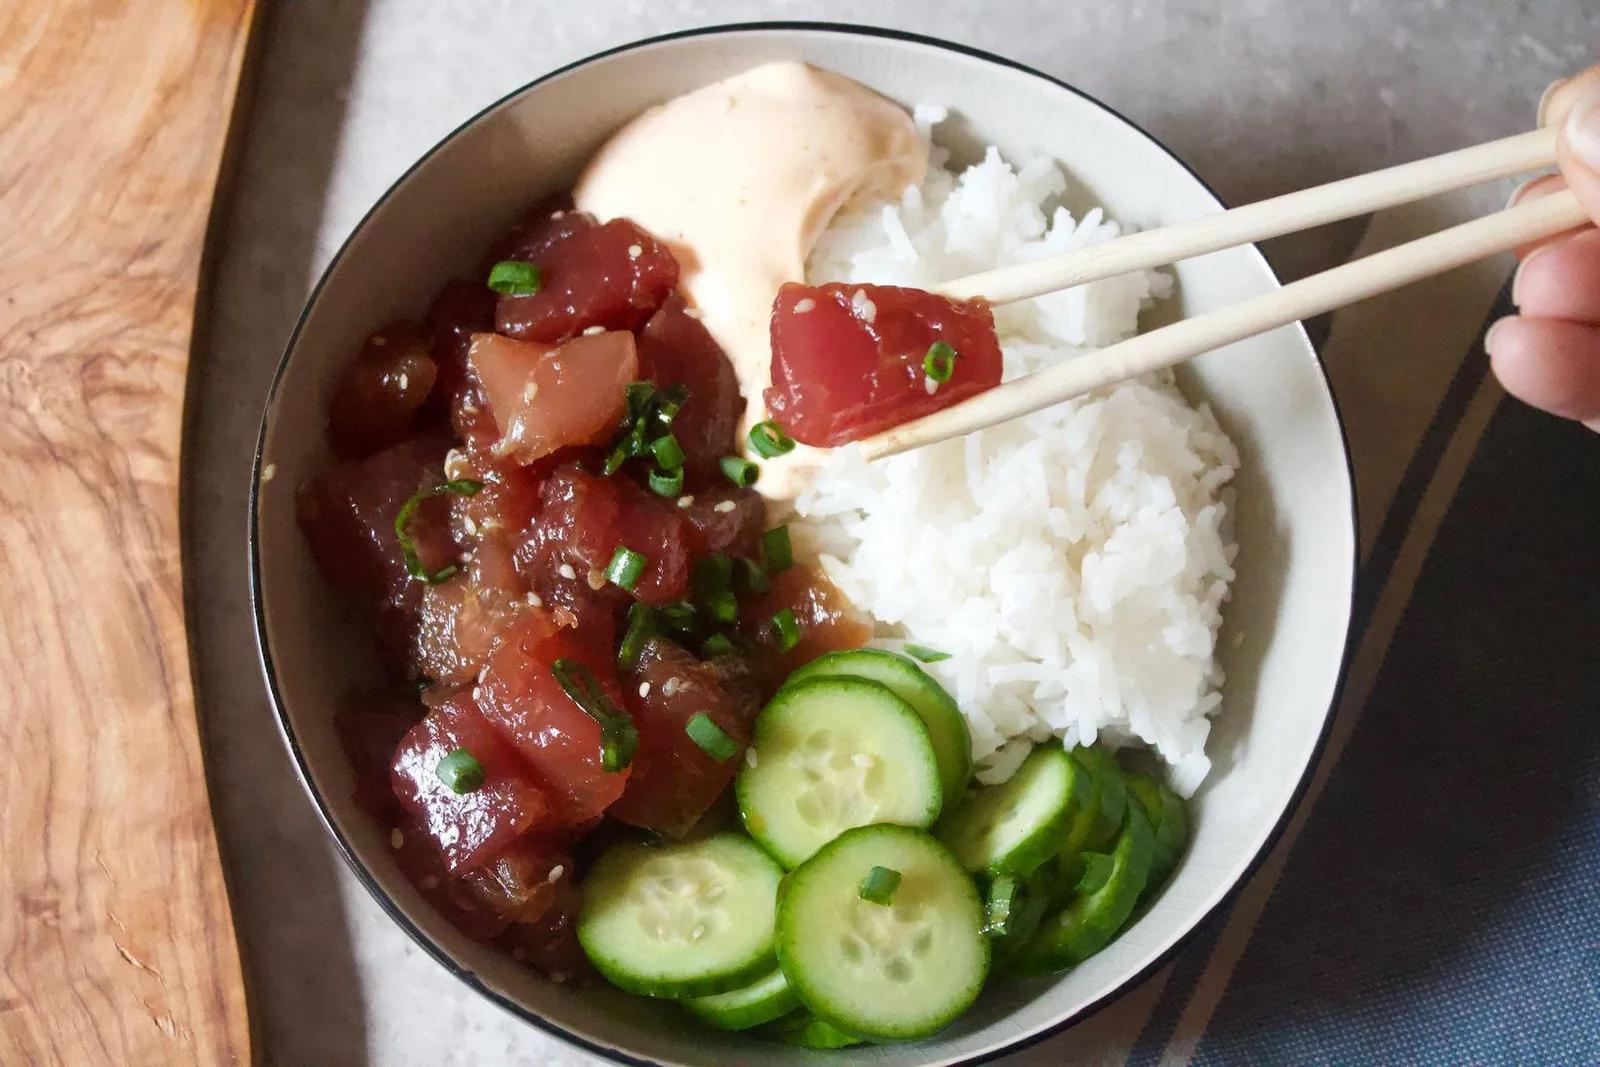 Perfect for leftover rice, this poke bowl just requires quickly mixing sushi-grade tuna in soy sauce, sesame oil, rice vinegar, slicing cucumbers, and topping it off with spicy mayo. (via <a href="https://www.brit.co/poke-bowl-recipe/"><strong>Brit + Co.</strong></a>)